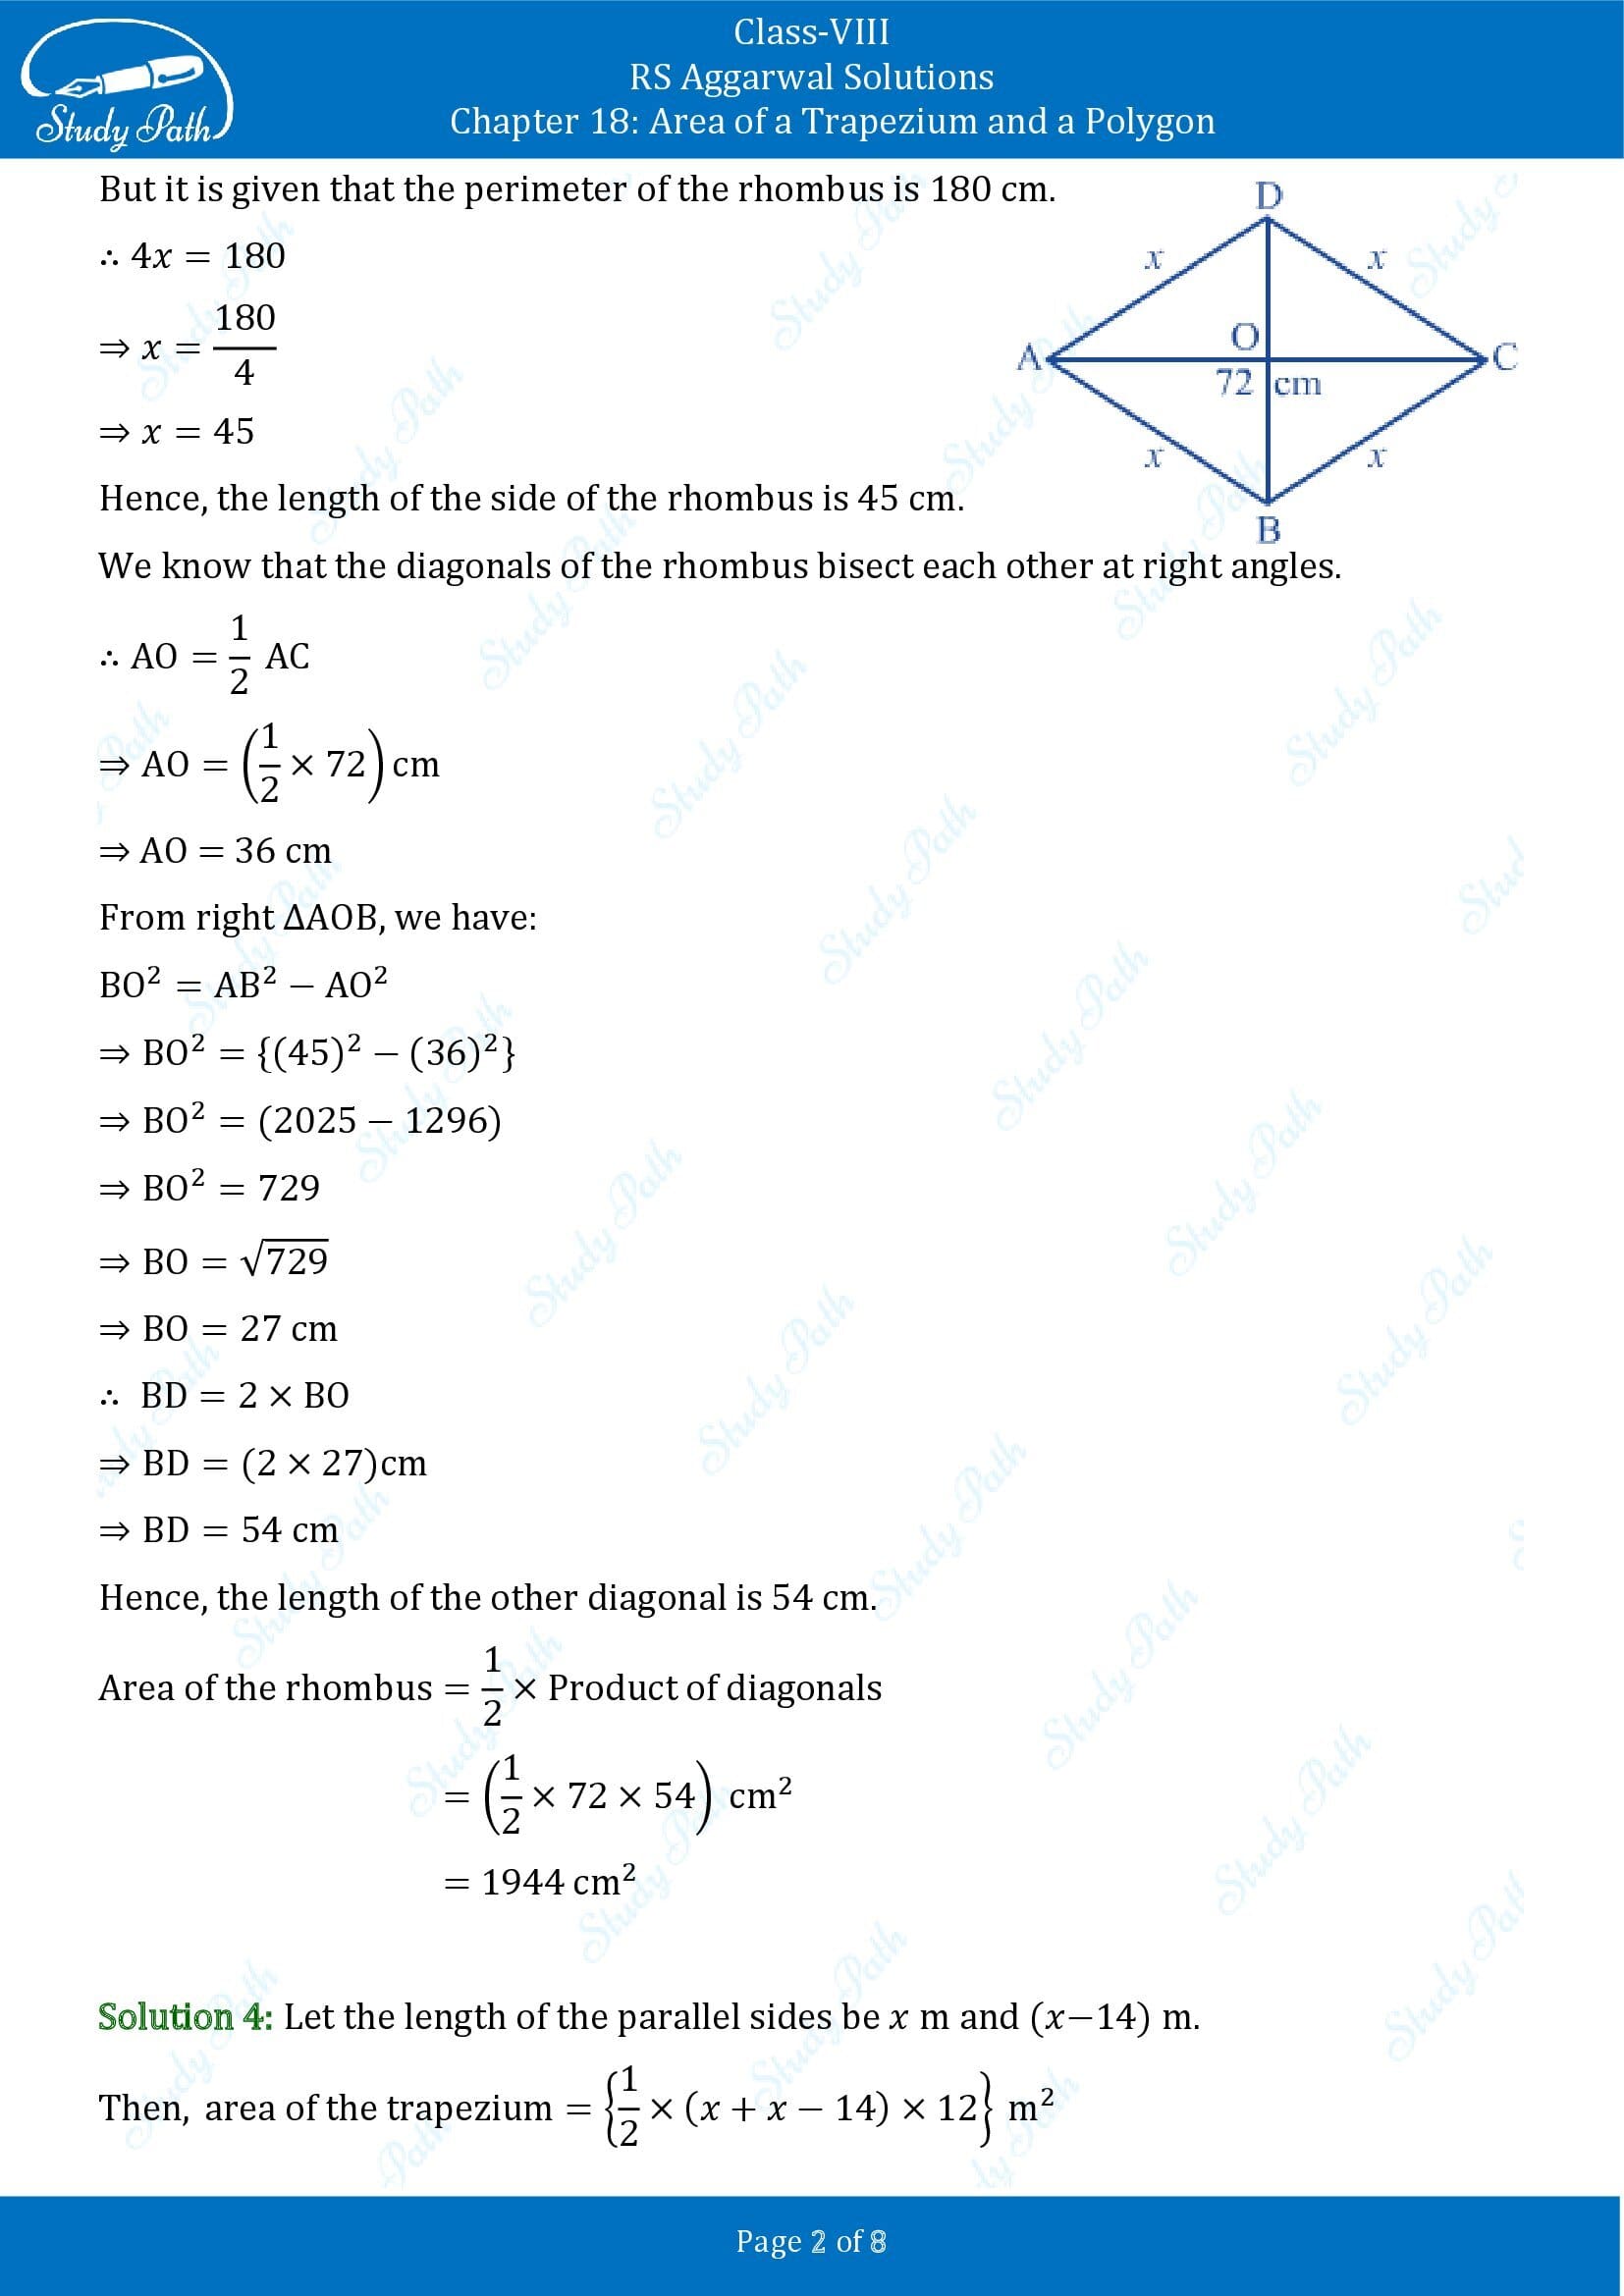 RS Aggarwal Solutions Class 8 Chapter 18 Area of a Trapezium and a Polygon Test Paper 00002